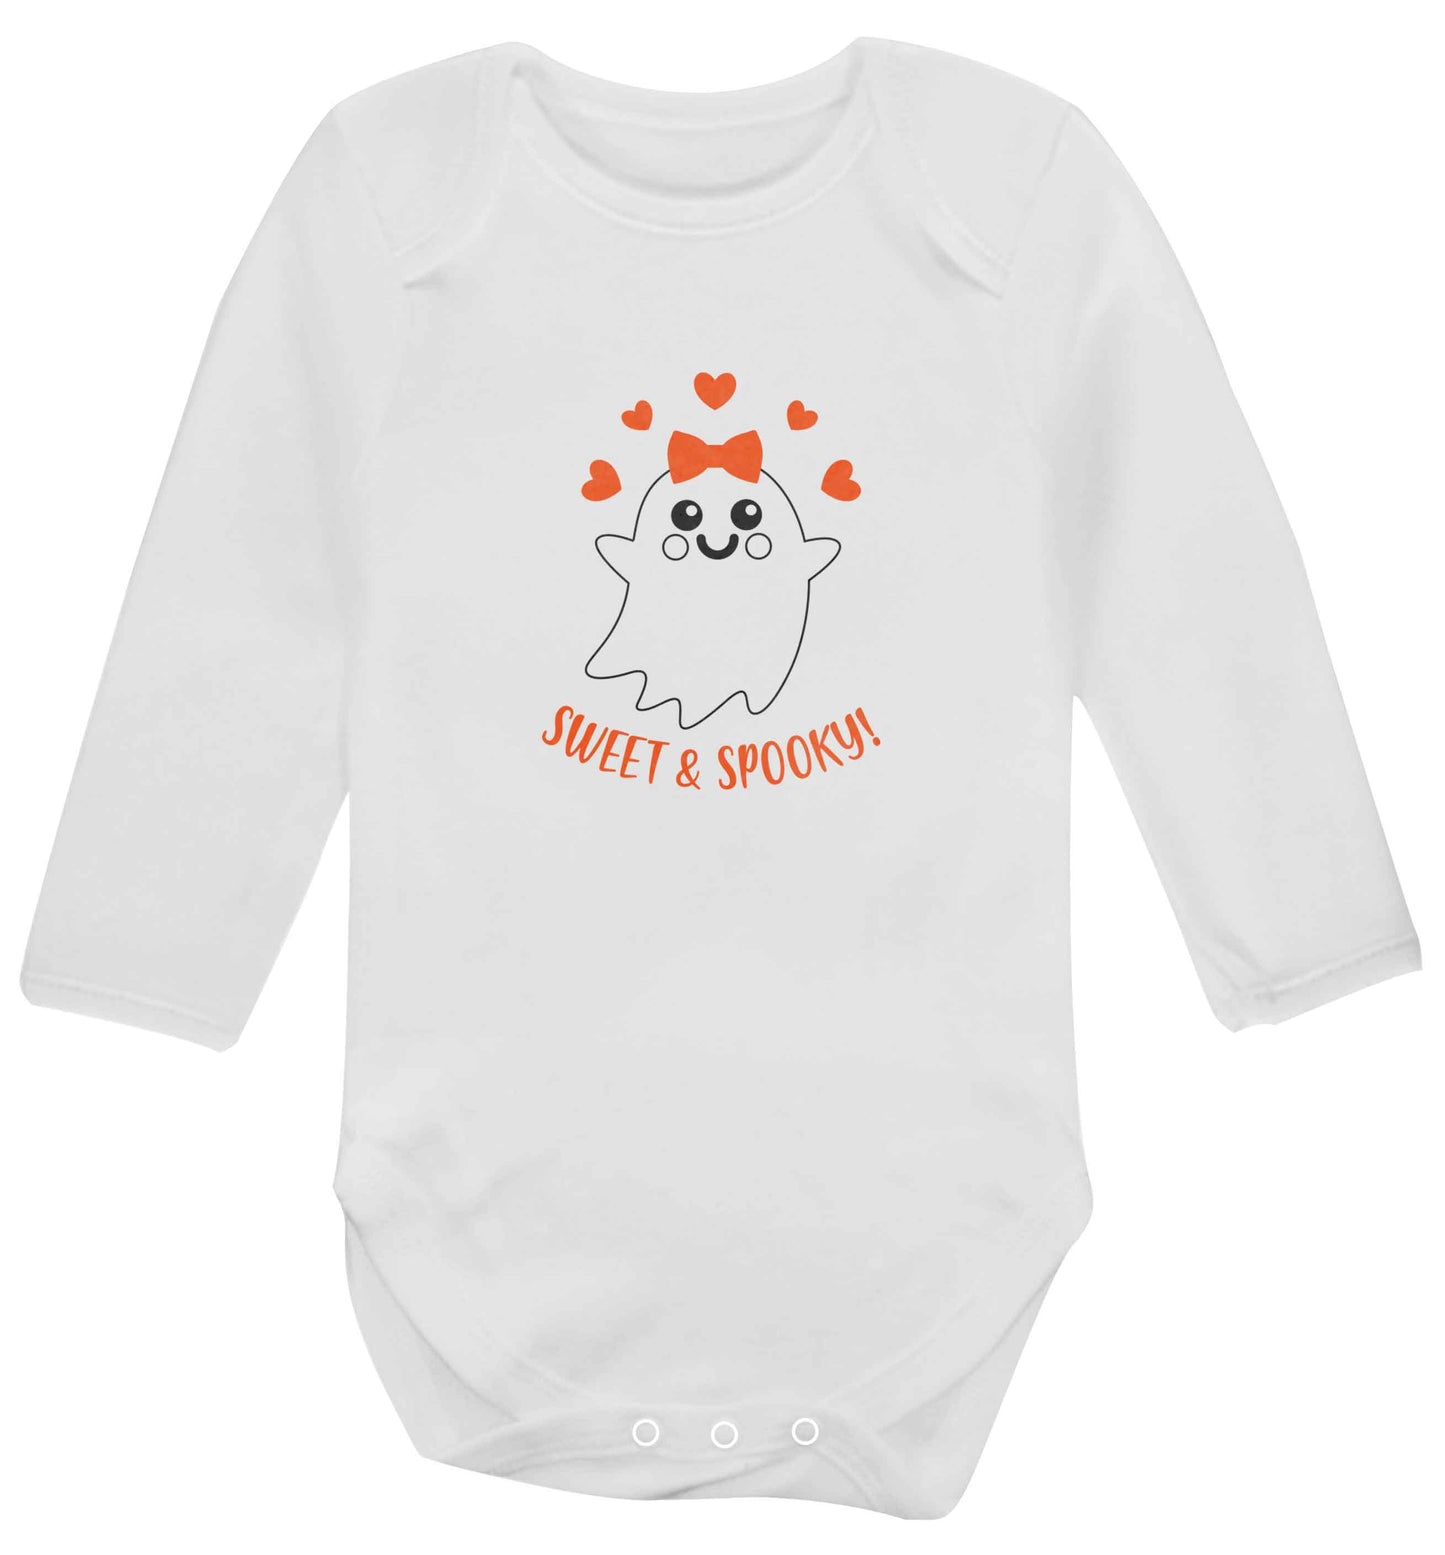 Sweet and spooky baby vest long sleeved white 6-12 months